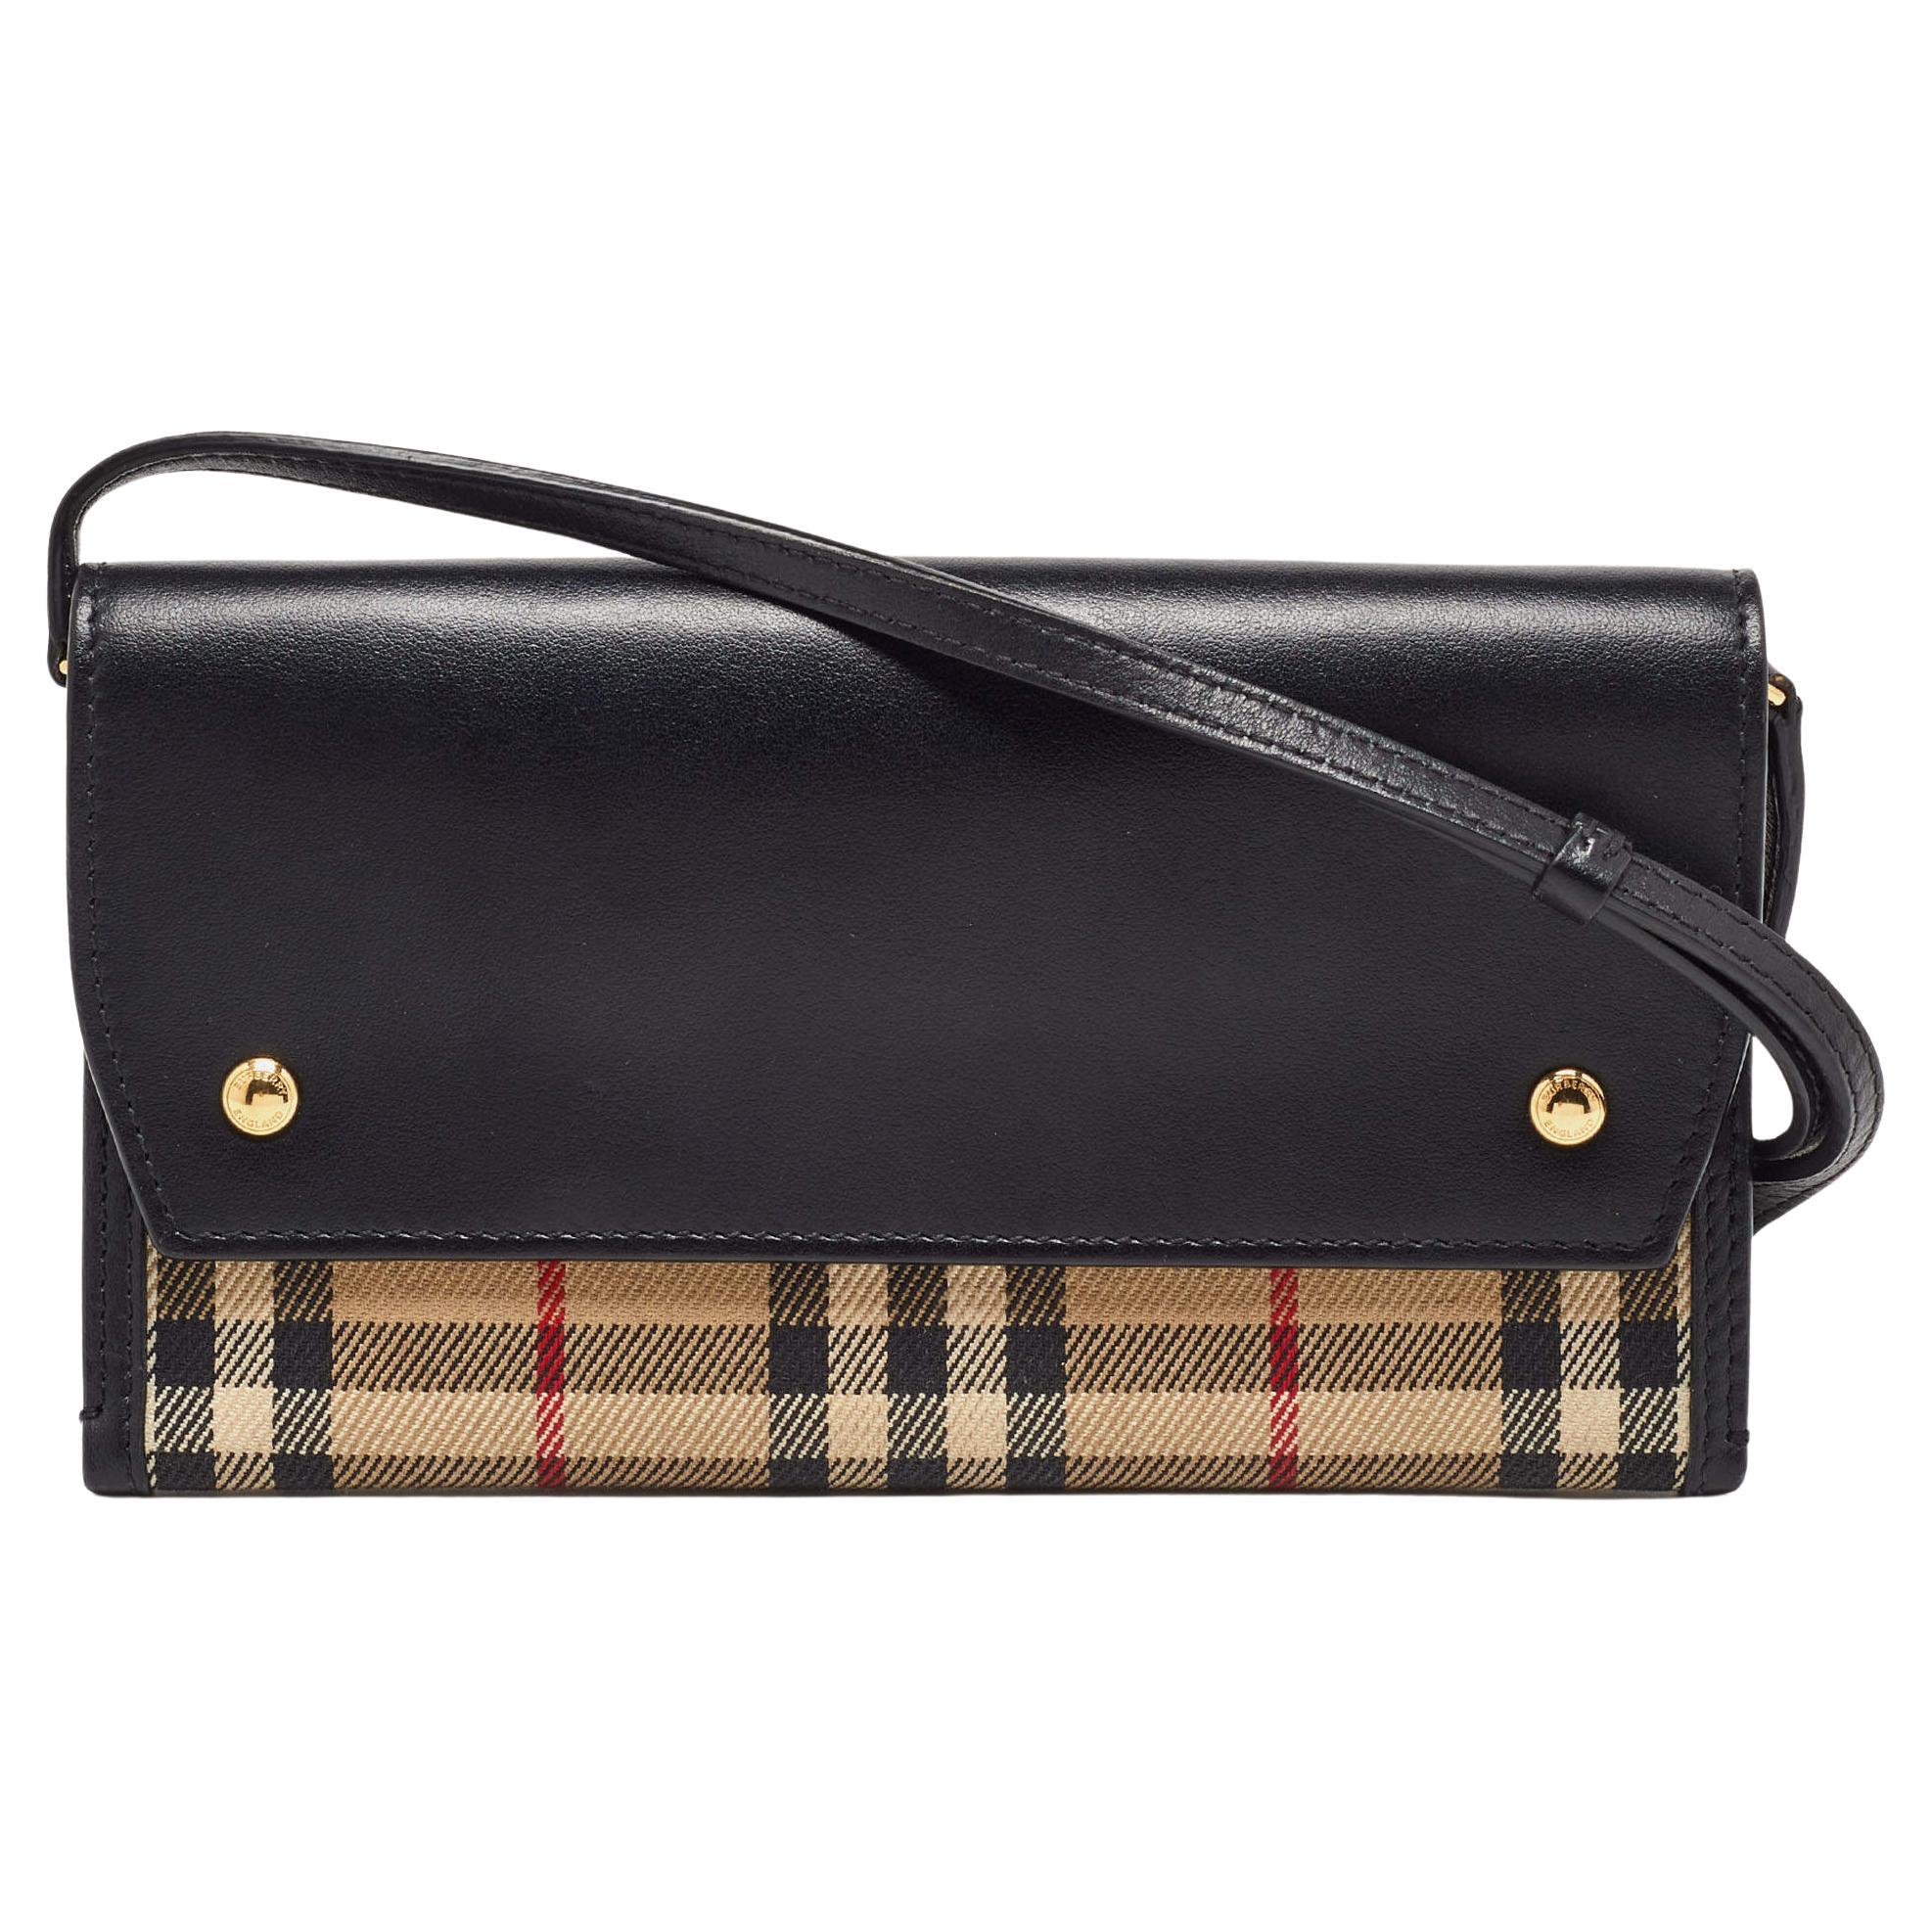 Burberry Black/Beige 1983 Knight Check Canvas and Leather Crossbody Bag